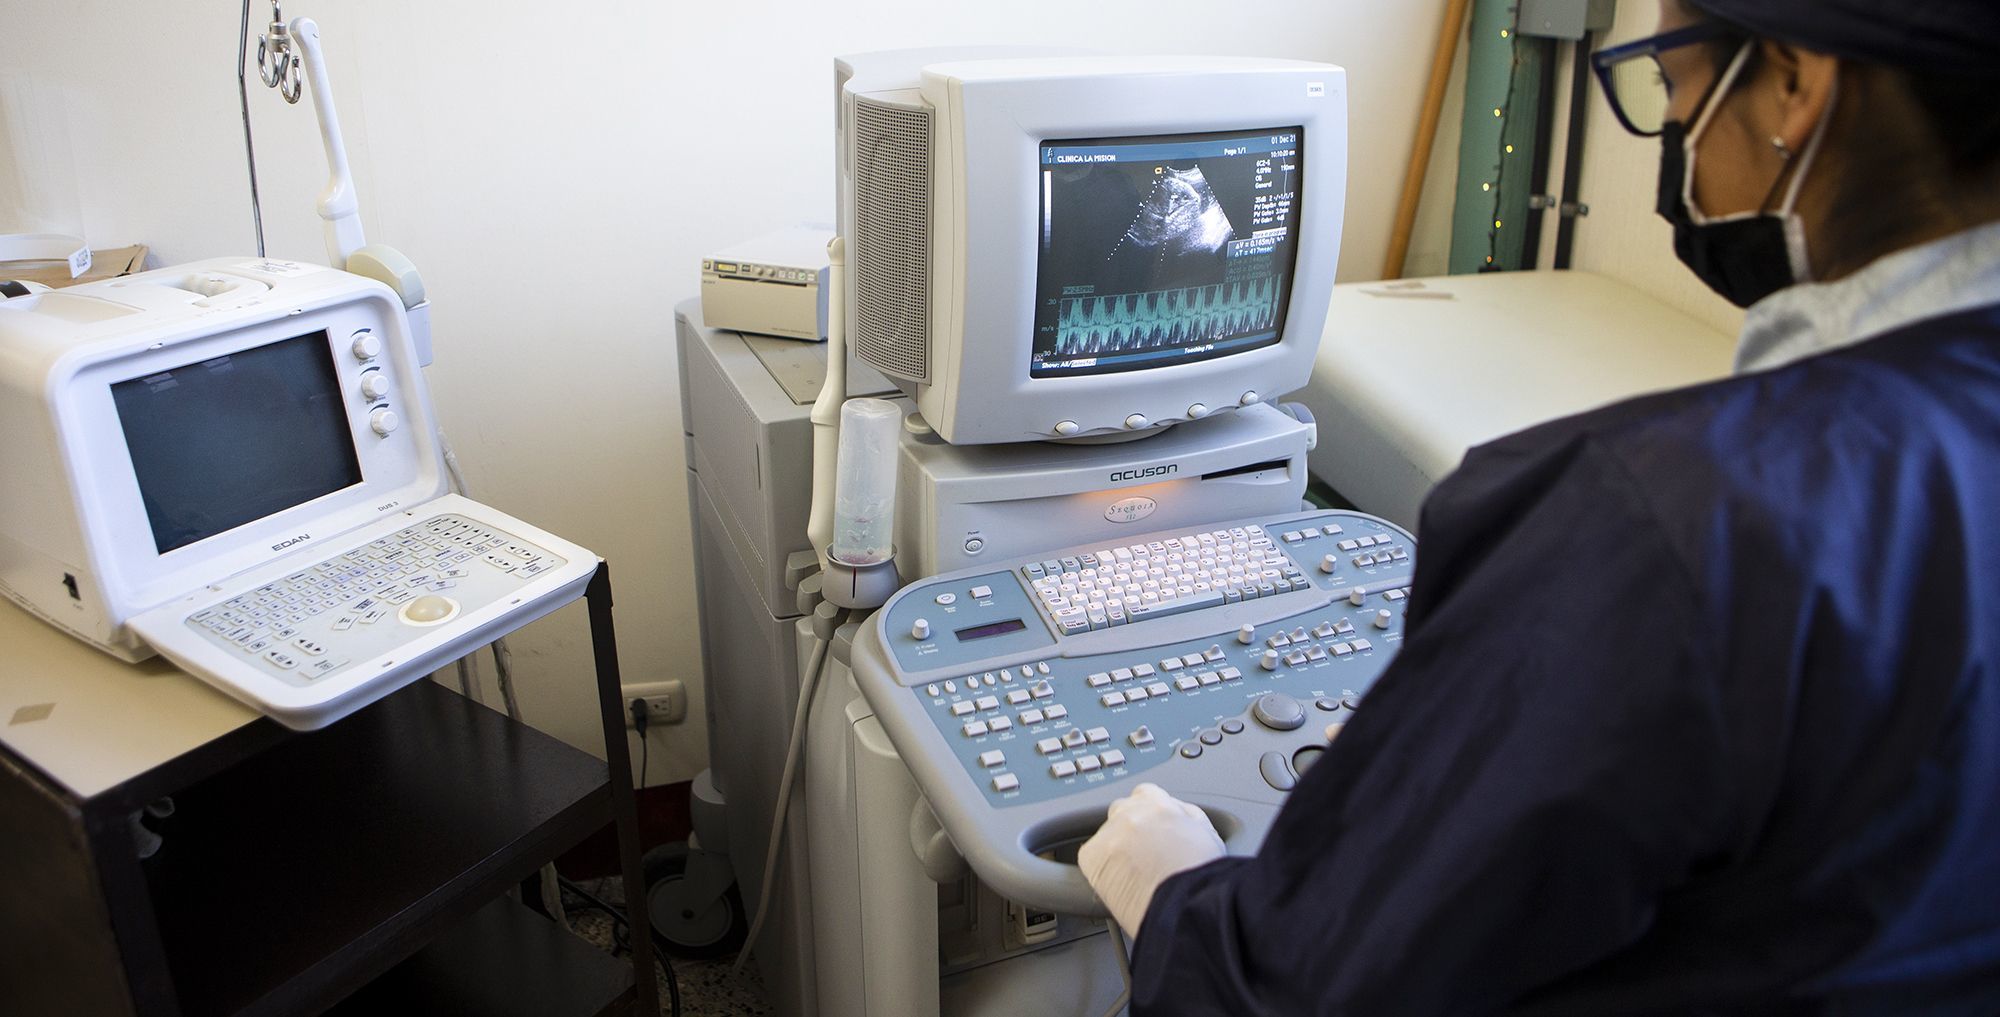 A New Ultrasound for the Clinic!